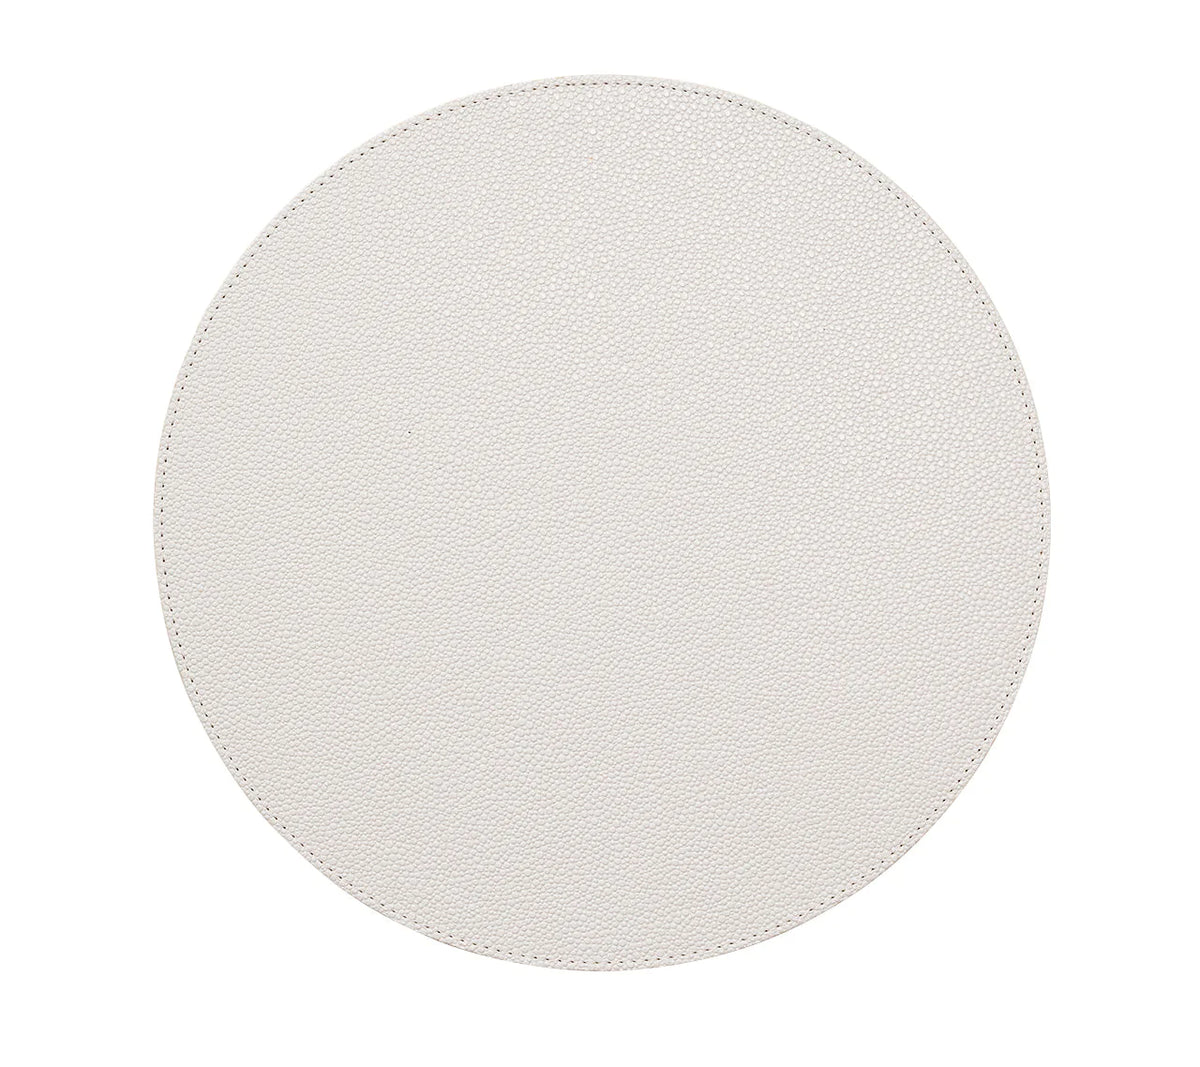 Pebble Placemat, Set of 4